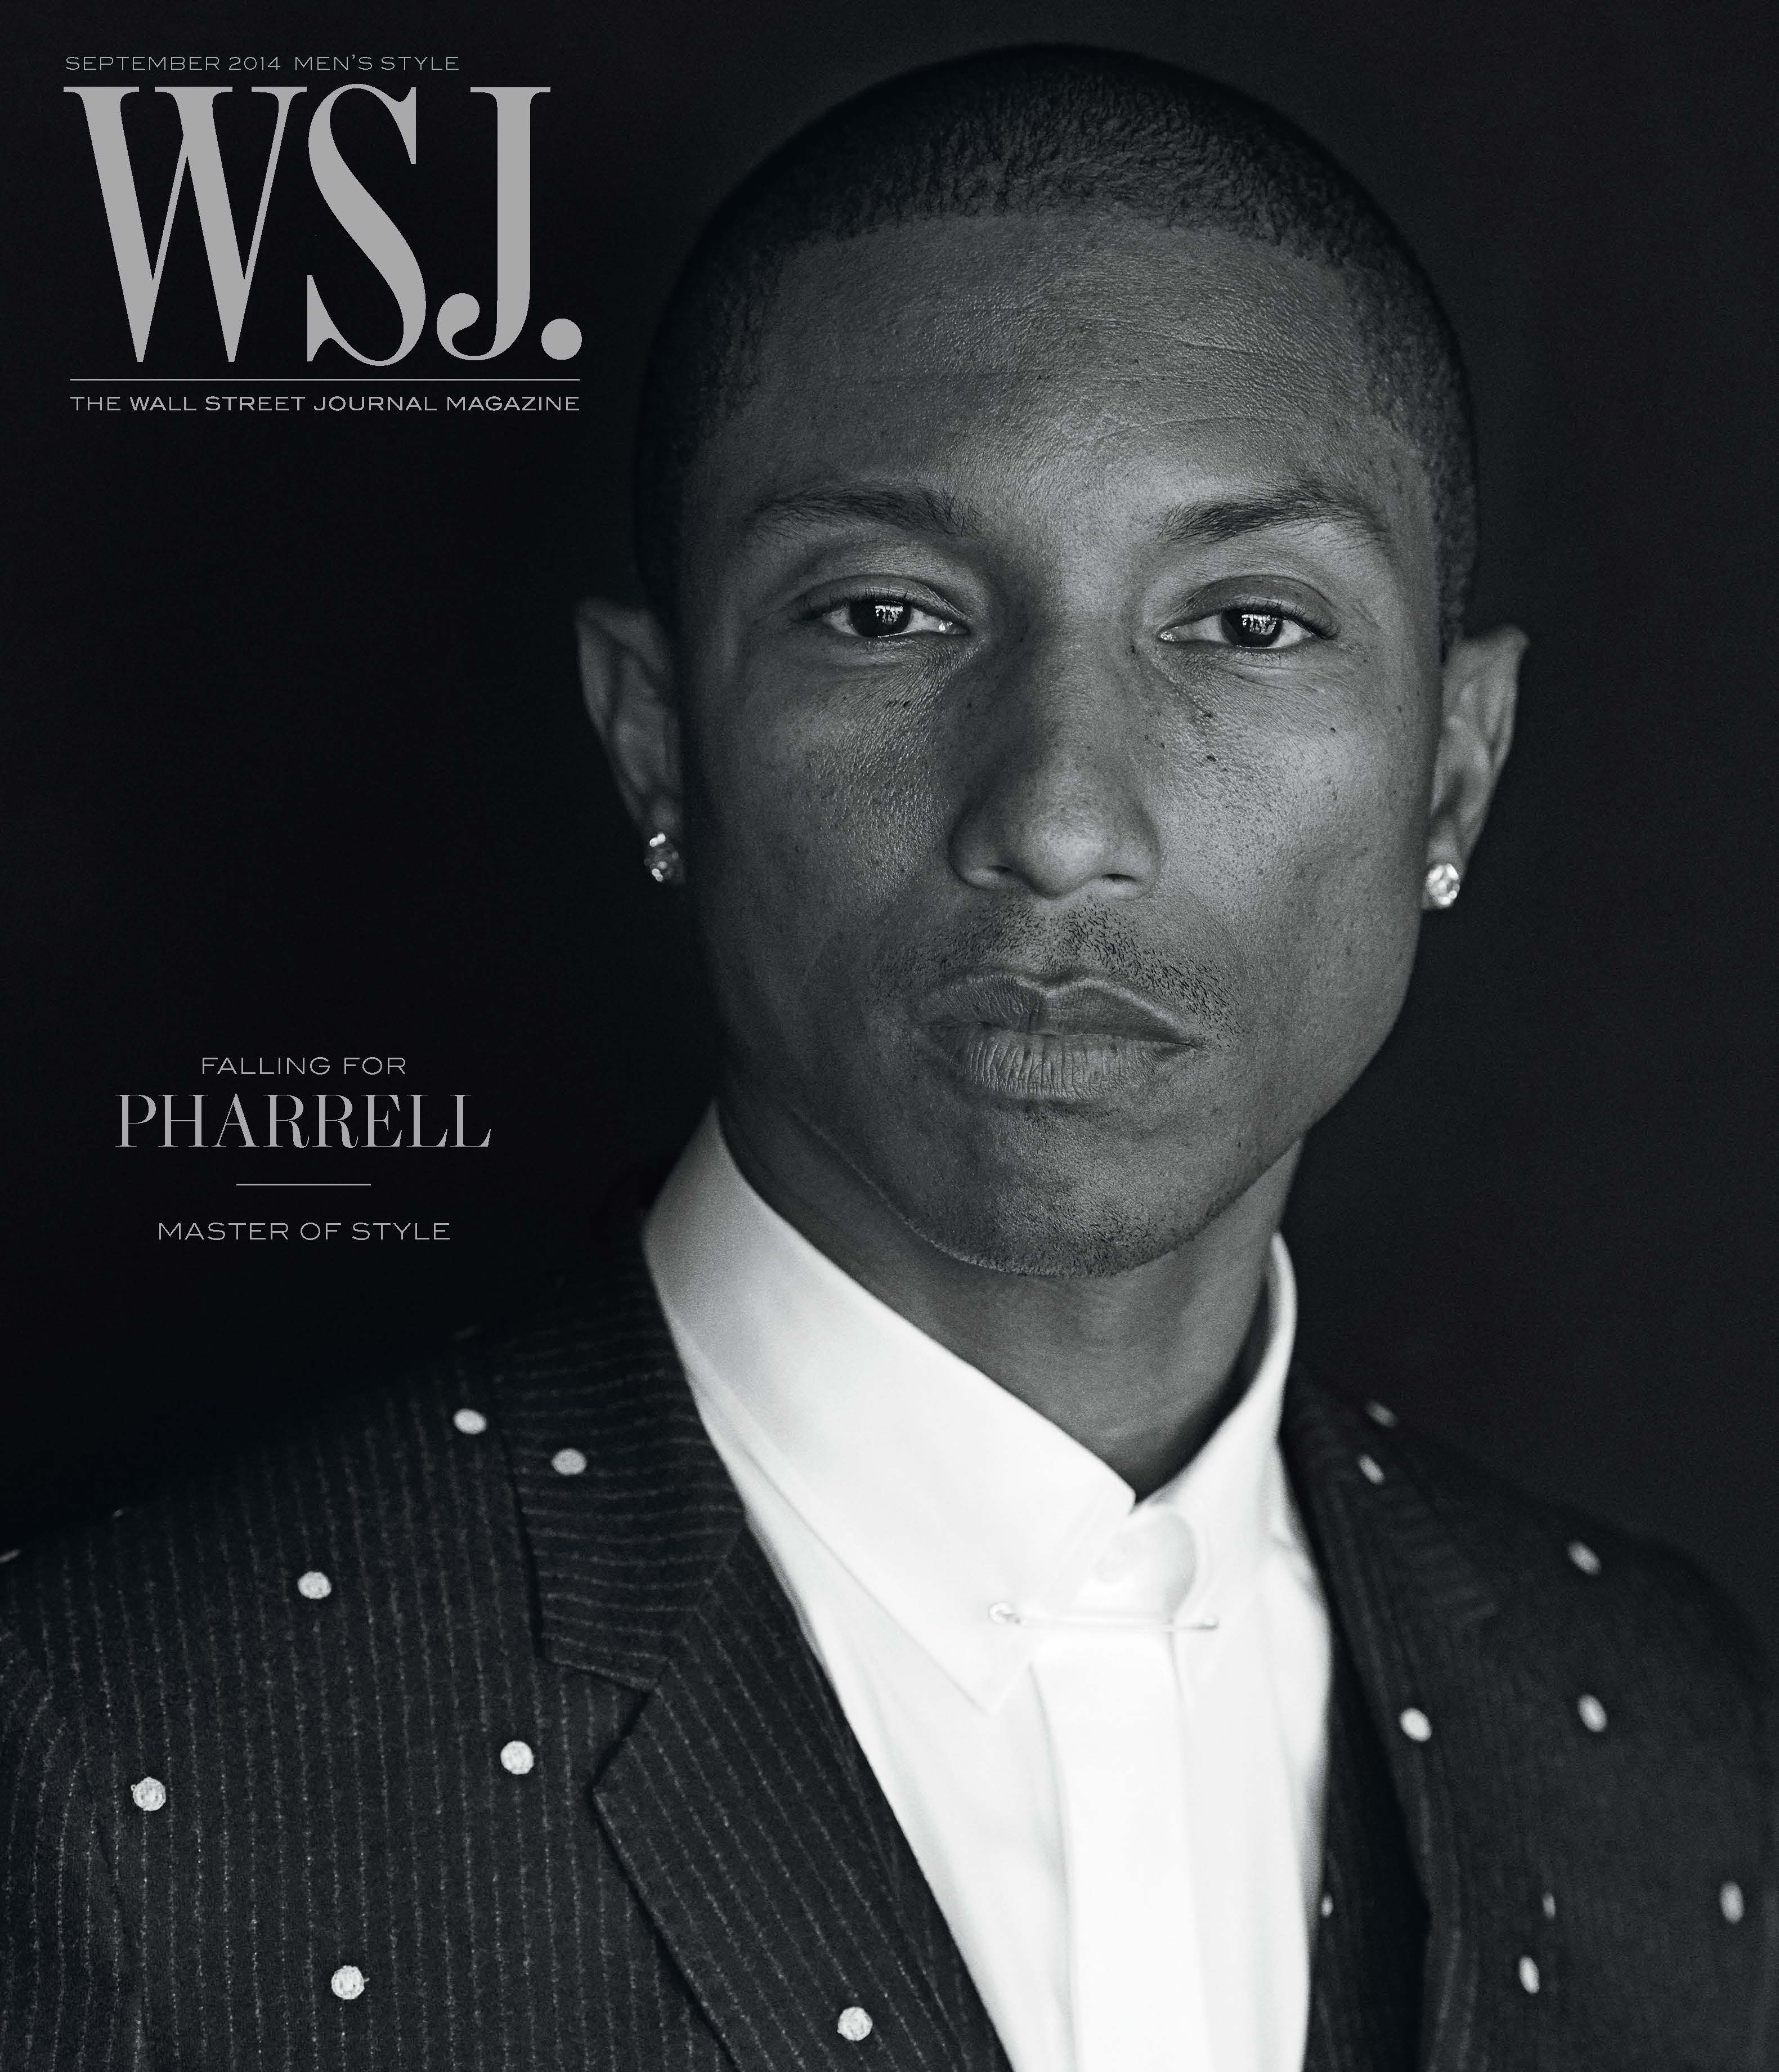 Pharrell Williams Embarrassed By Being A Fashion Figure